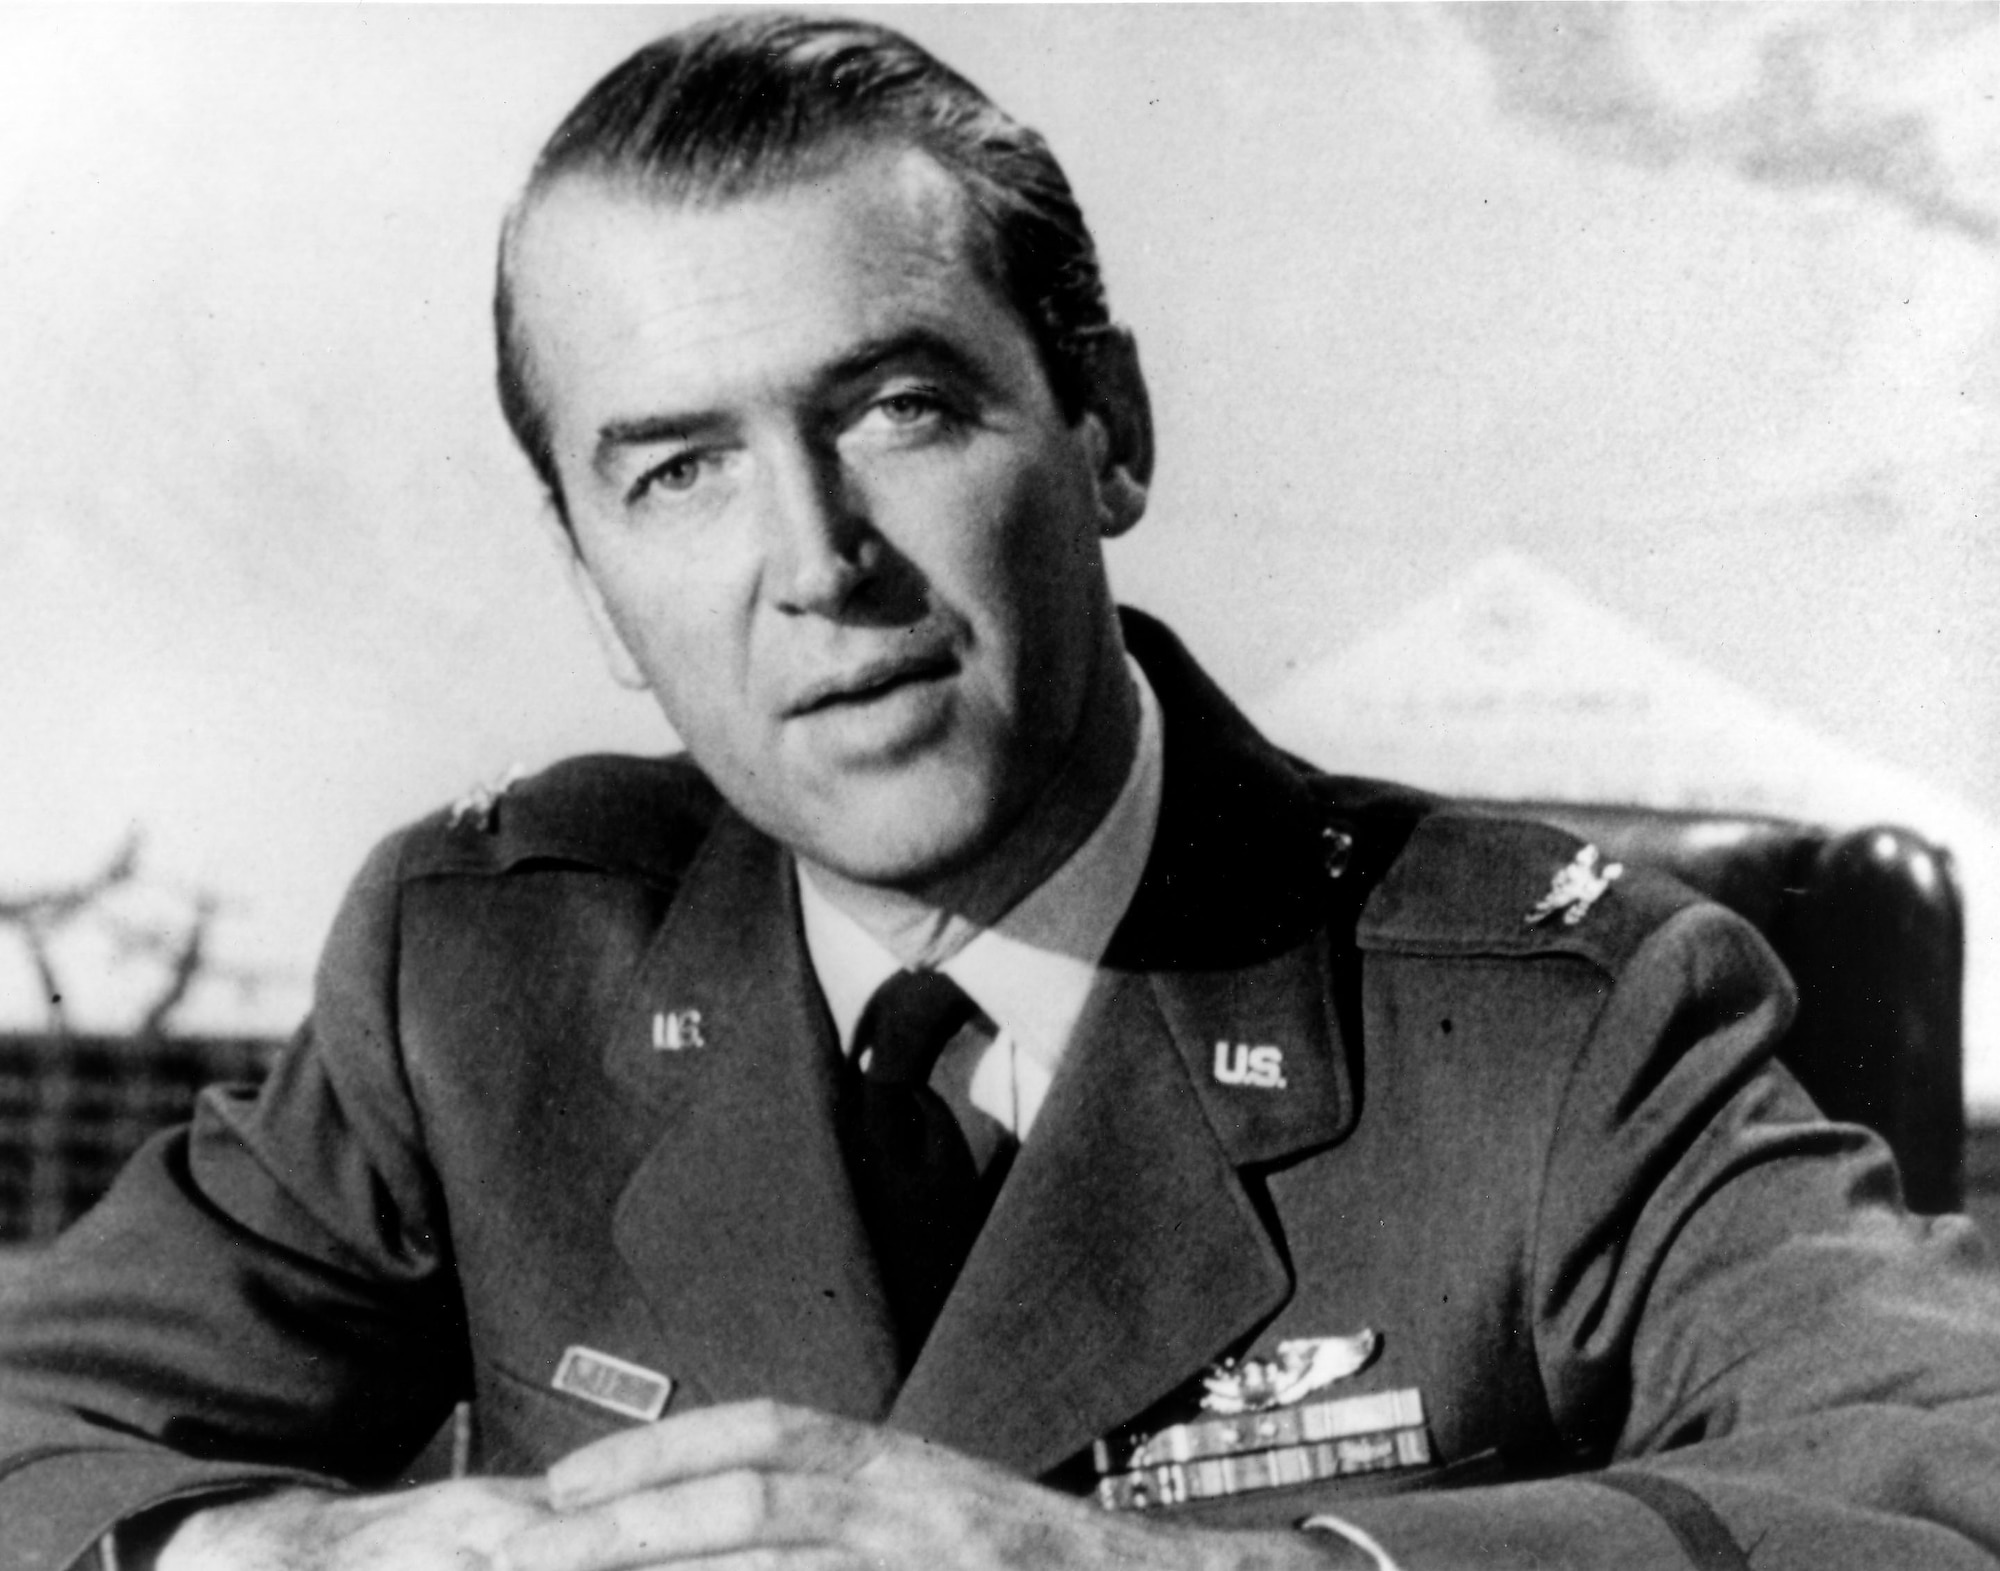 Jimmy Stewart began flying combat missions on March 31, 1944, and was appointed Operations Officer of the 453rd Bomb Group and, subsequently, Chief of Staff of the 2nd Combat Wing, 2nd Air Division of the 8th Air Force.  He ended the war with 20 combat missions and remained in the USAF Reserve where he was later promoted to brigadier general.  (U.S. Air Force photo)